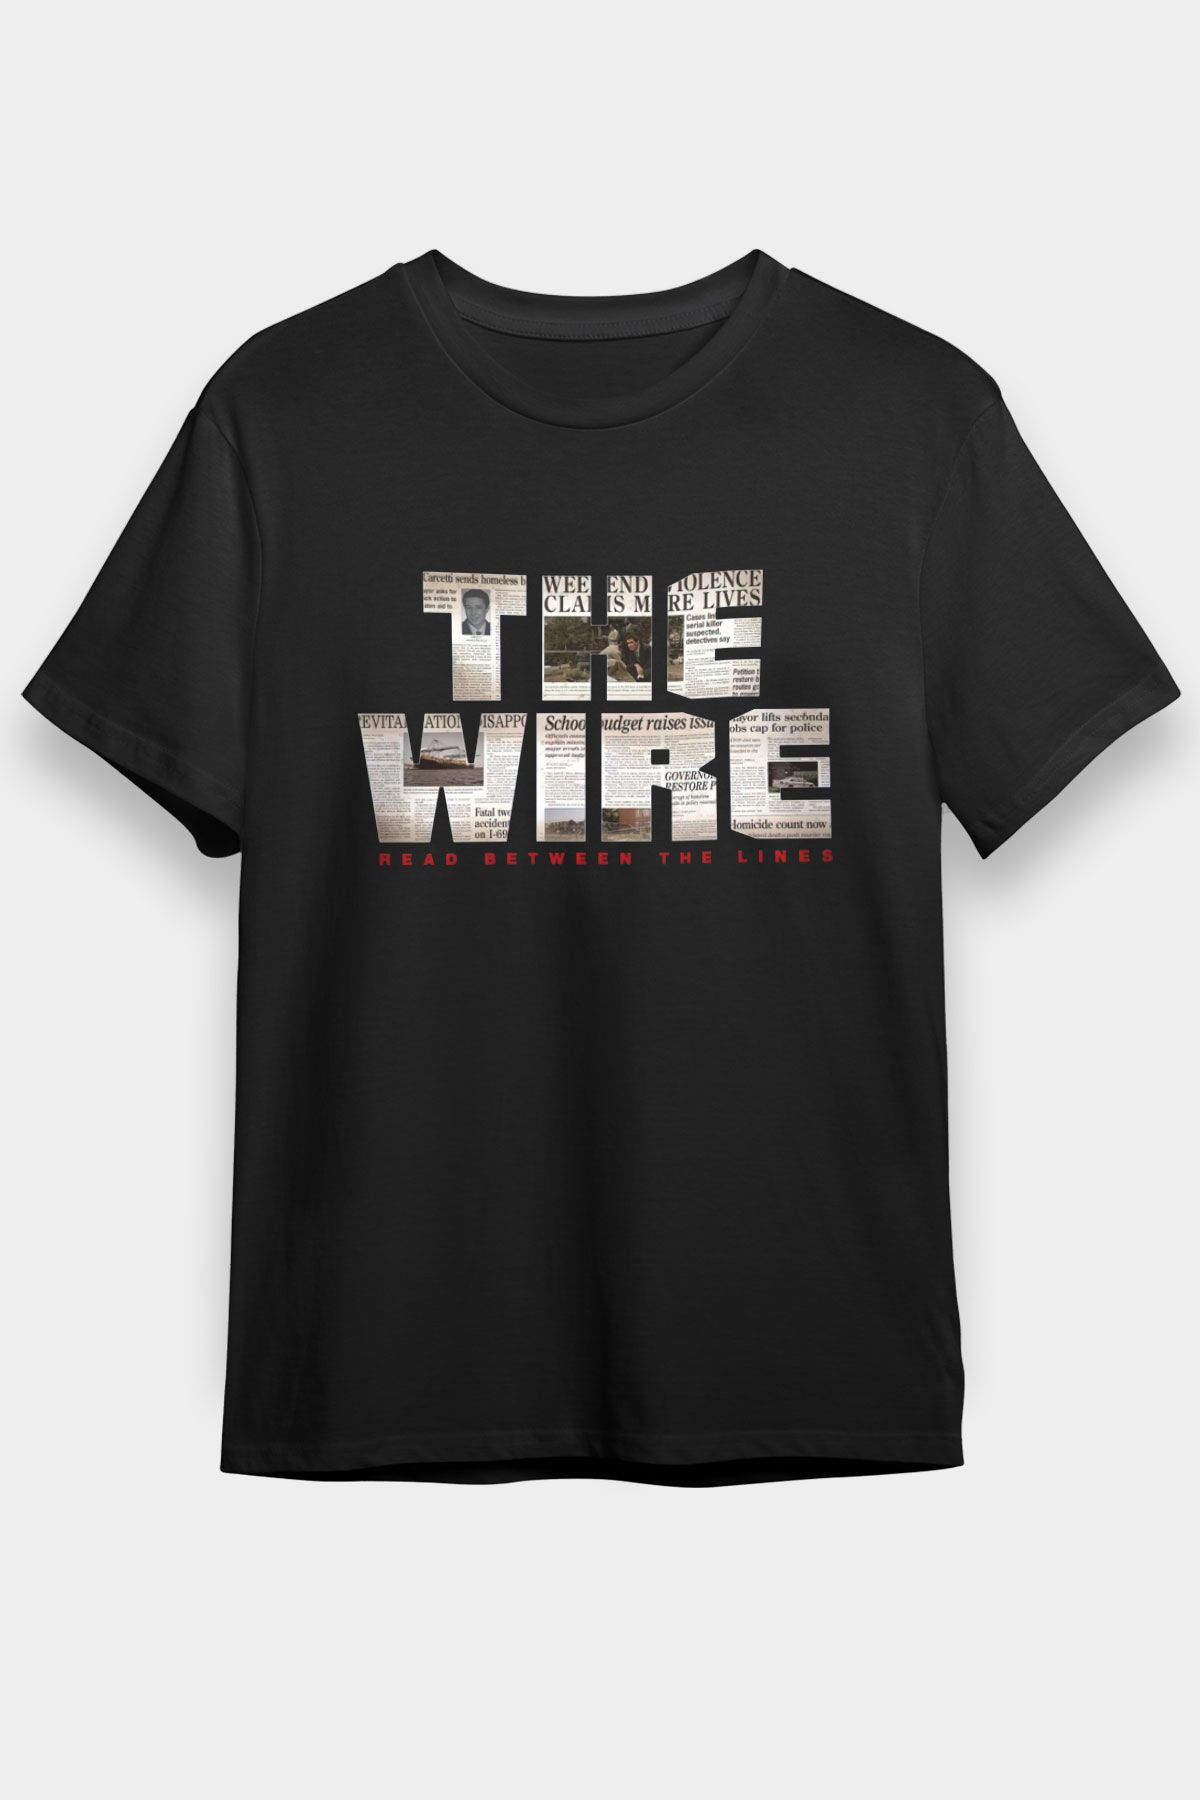 The Wire T shirt,Movie , Tv and Games Tshirt